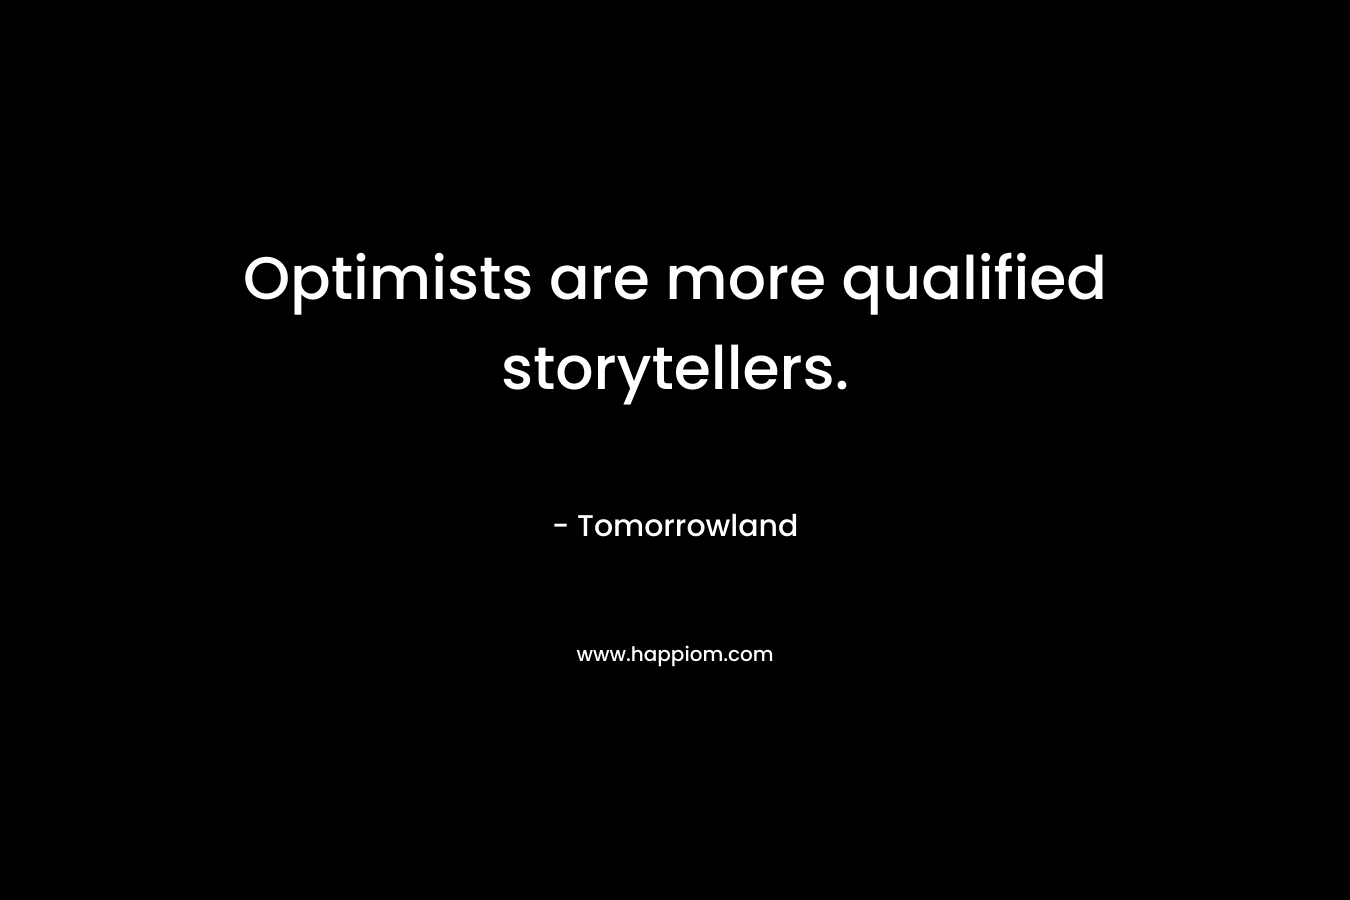 Optimists are more qualified storytellers.